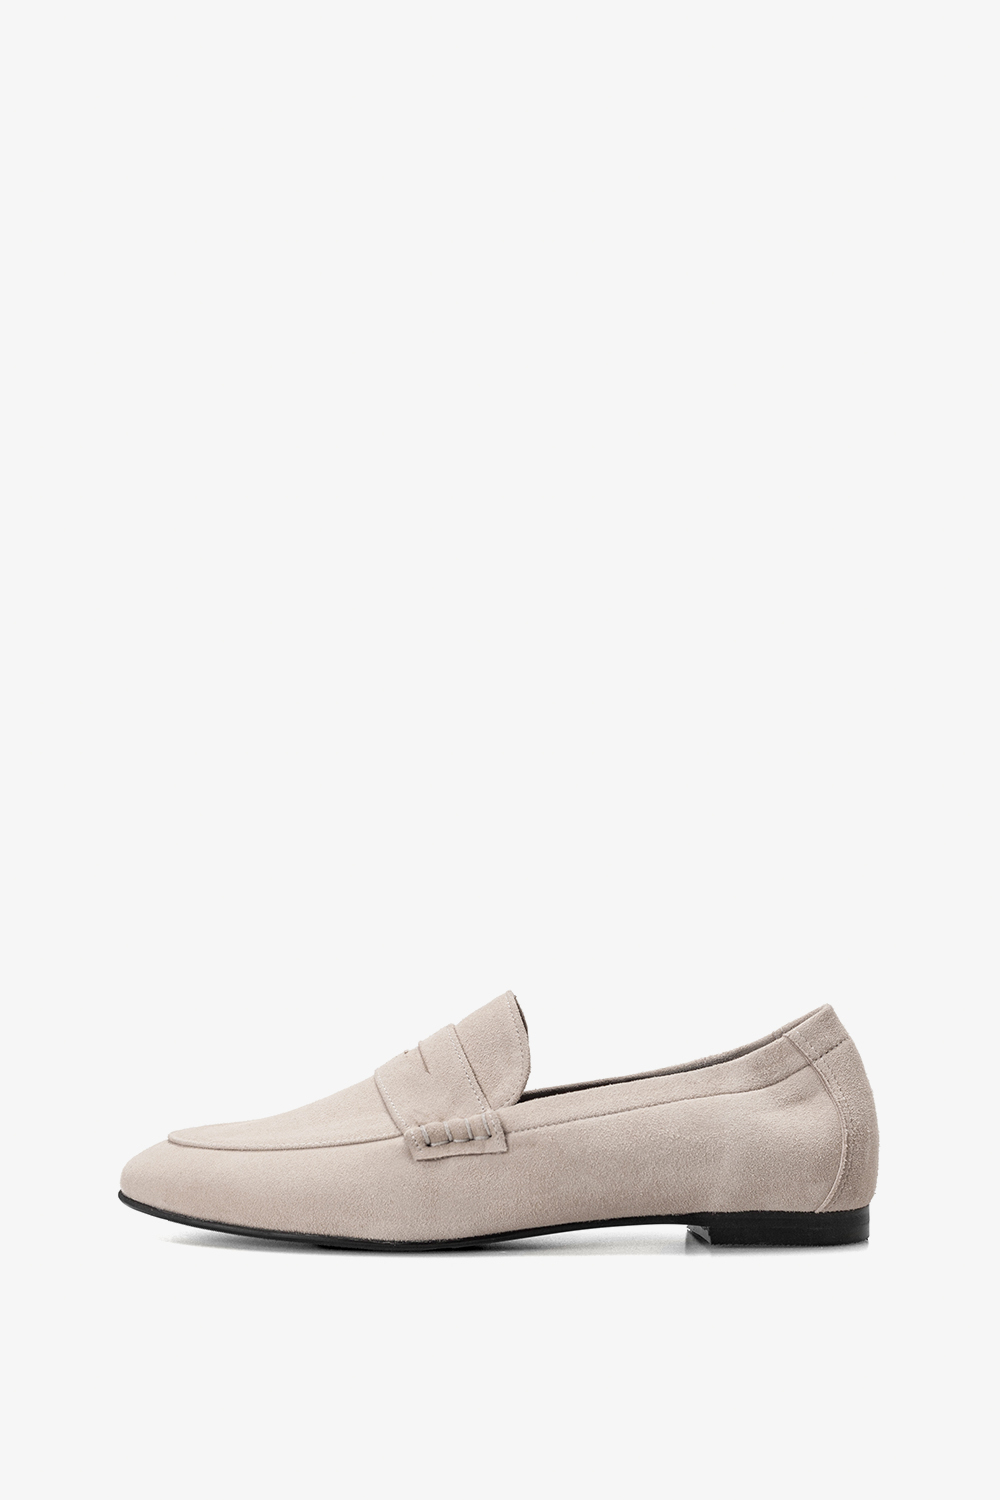 Modern Penny Loafer in Pearl Powder